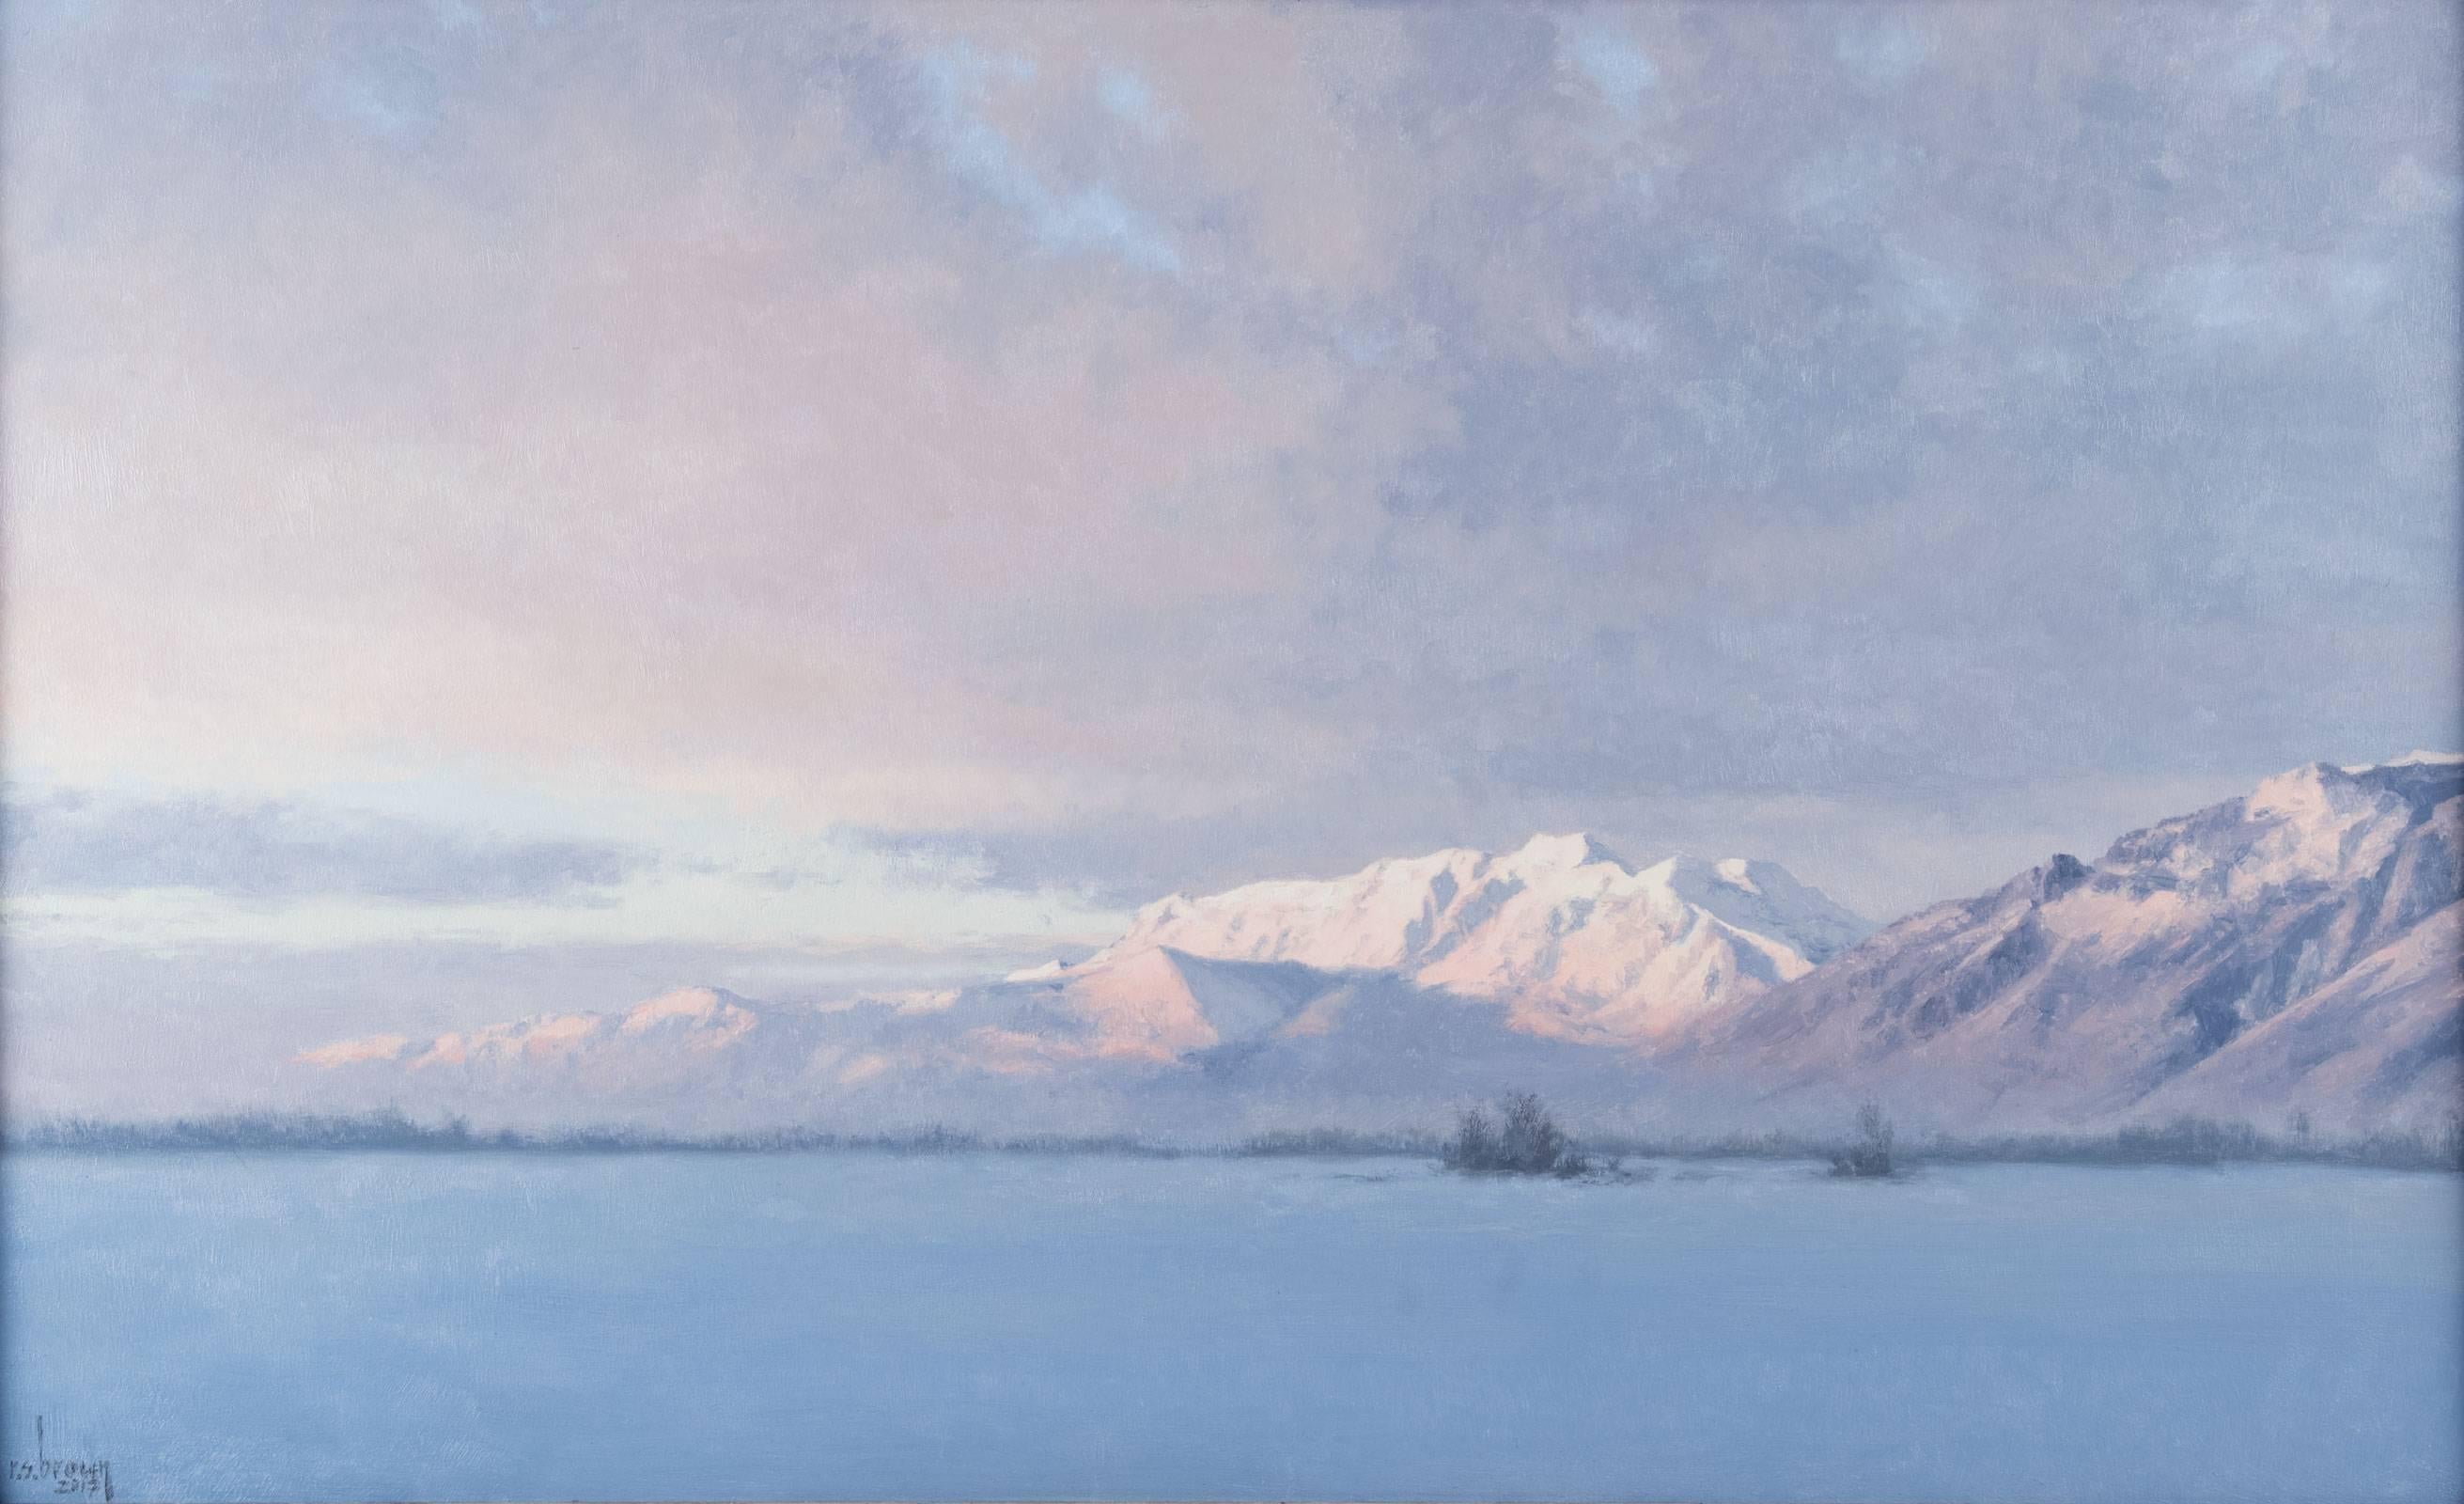 A native of Salt Lake City, Utah, Ryan Brown attended Brigham Young University, before furthering his art education at the Florence Academy of Art, where he was immersed in teachings of the academic and naturalist traditions favoured in the